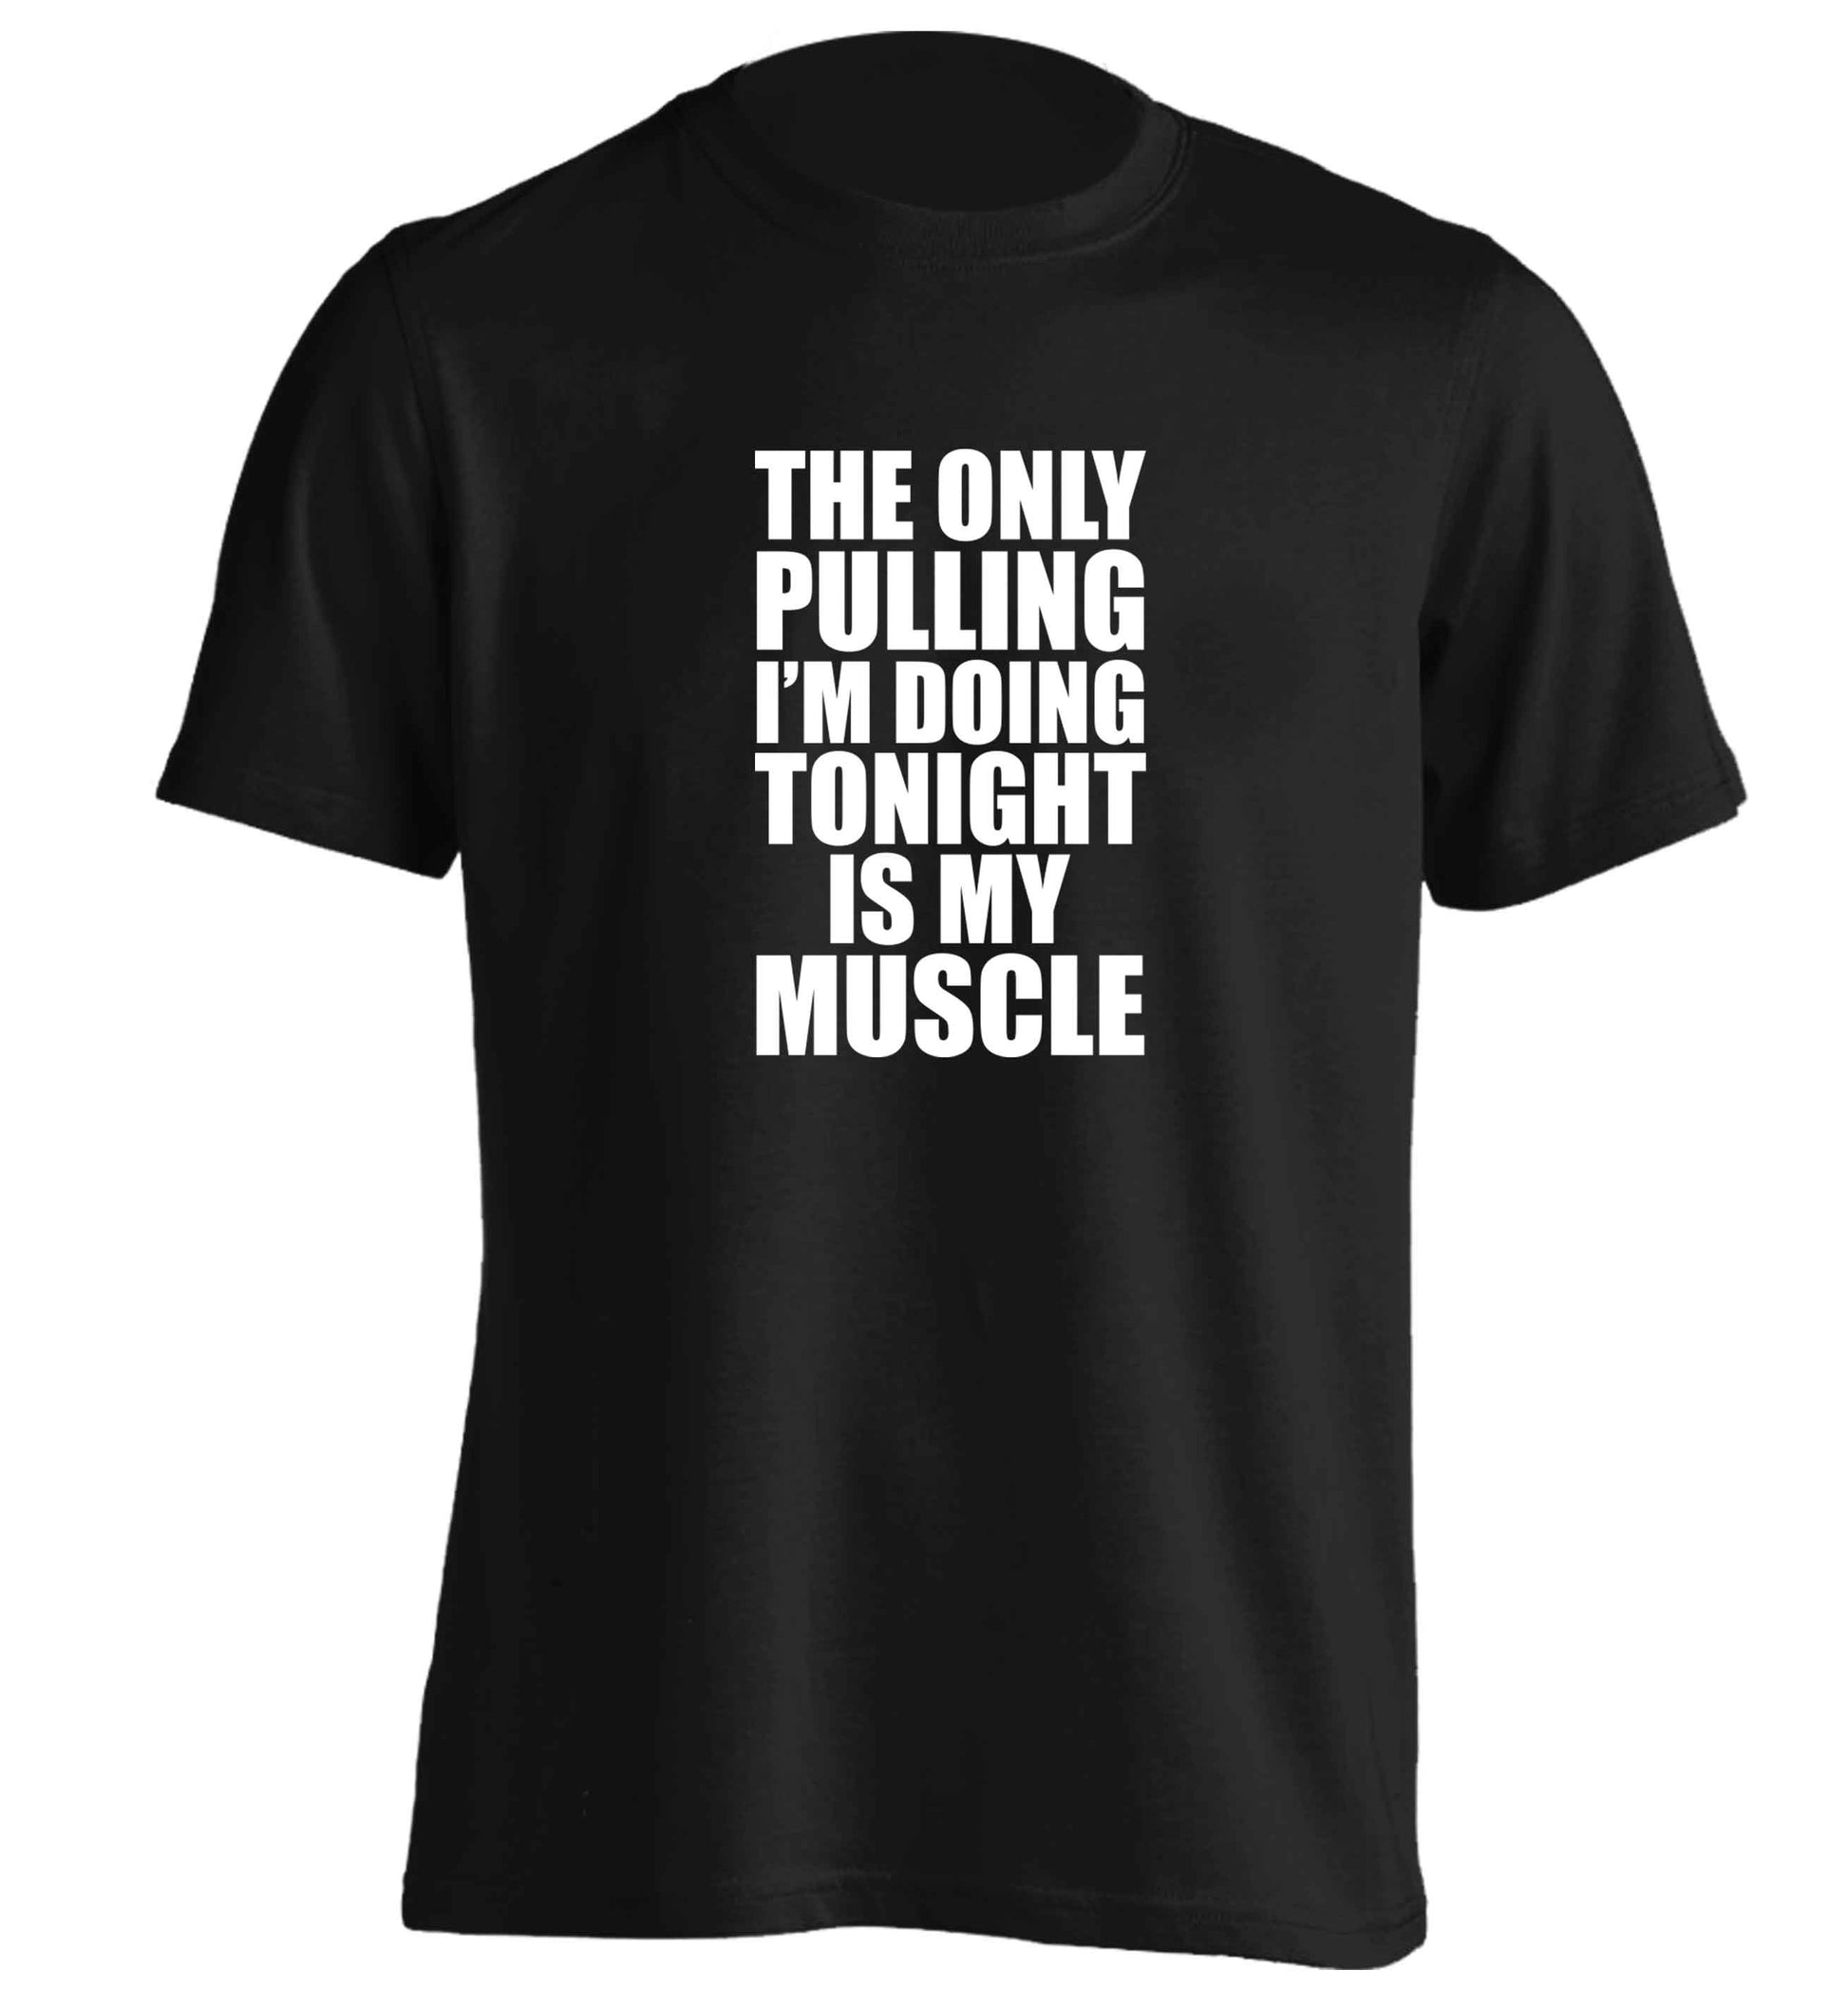 The only pulling I'm doing tonight is my muscle adults unisex black Tshirt 2XL